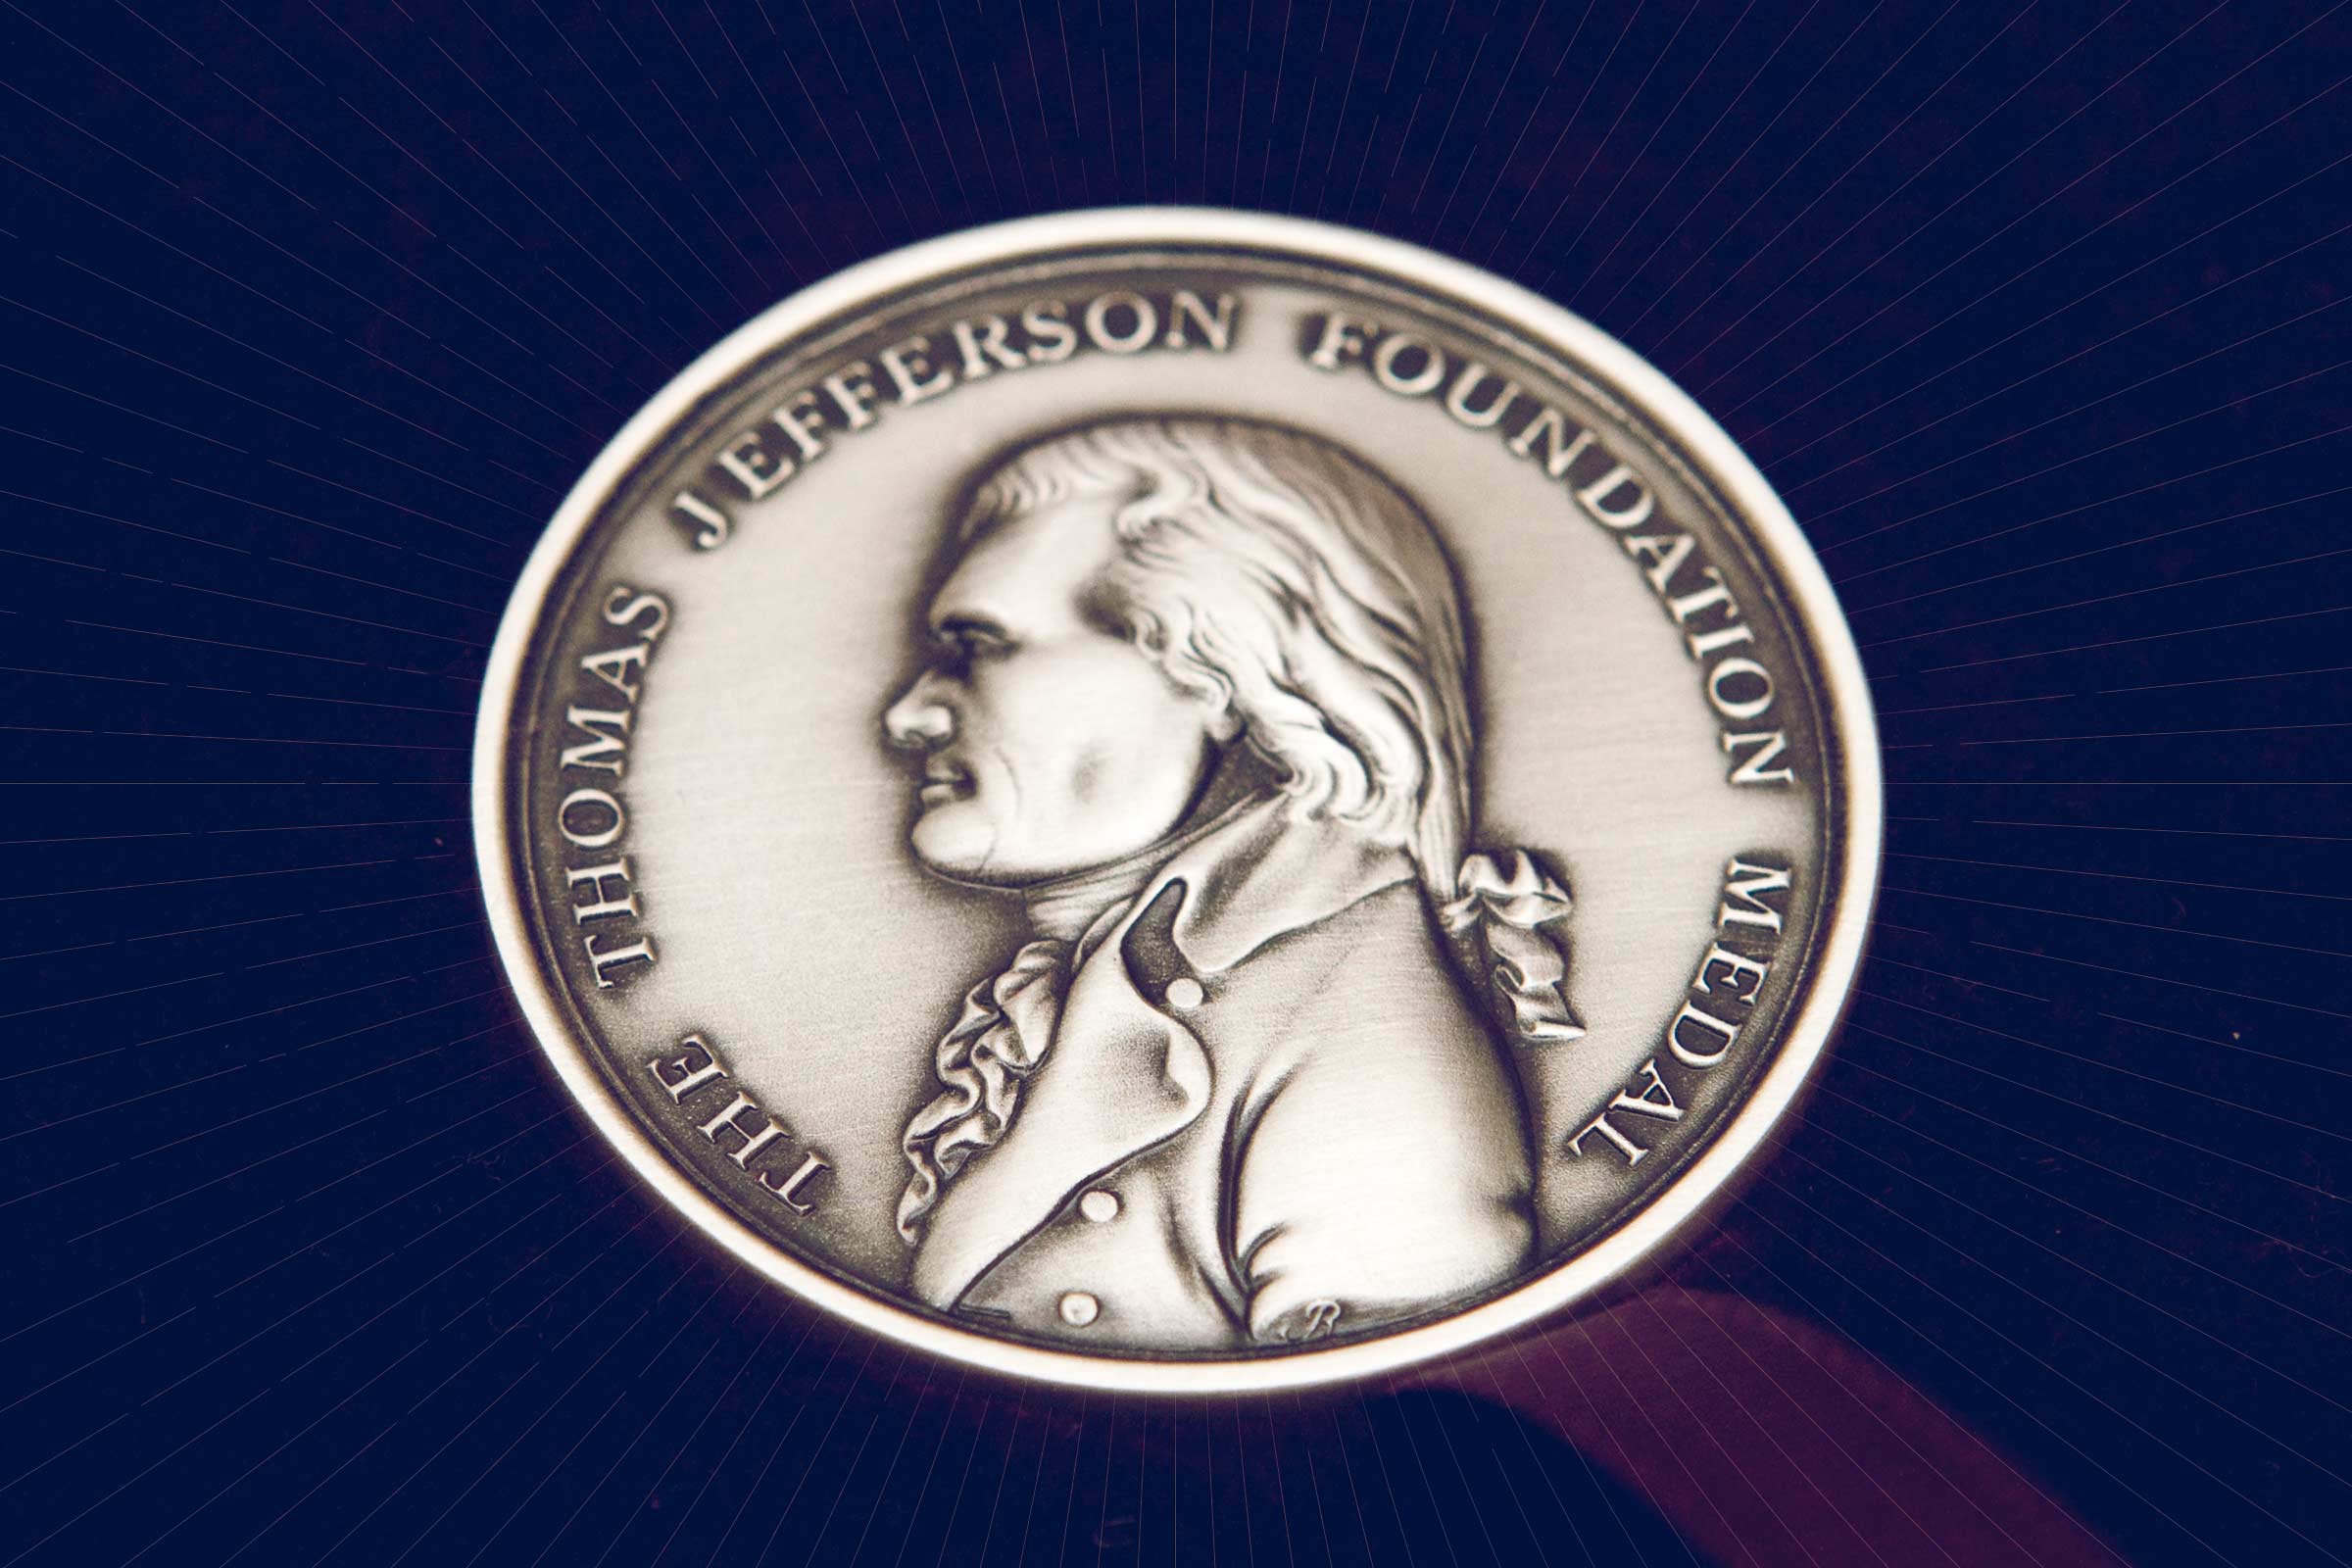 Thomas Jefferson Foundation Medal with a picture of Thomas Jefferson